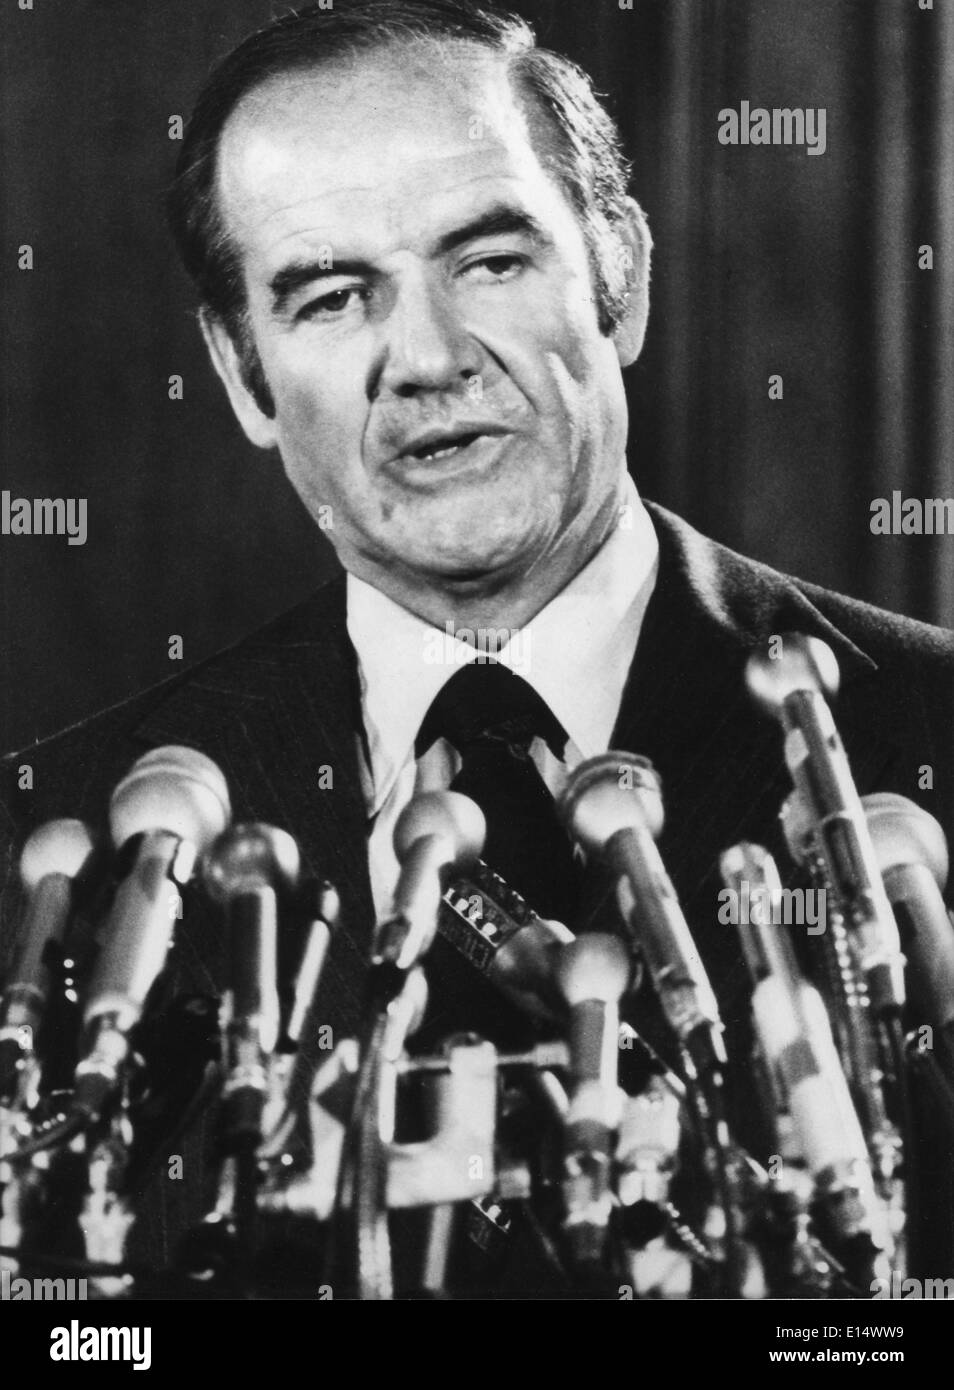 George McGovern, a decorated WWII bomber pilot who represented South Dakota in the House and the Senate, campaigned against U.S. involvement in Vietnam in his 1972 Democratic bid for the presidency and lost in a landslide to Richard M. Nixon, died Sunday Oct. 21, 2012. He was 90. PICTURED: Feb. 01, 1971 - Pierre, South Dakota, U.S. - Senator GEORGE MCGOVERN speaking at a press conference in South Dakota, seeking Presidential candidacy. Stock Photo